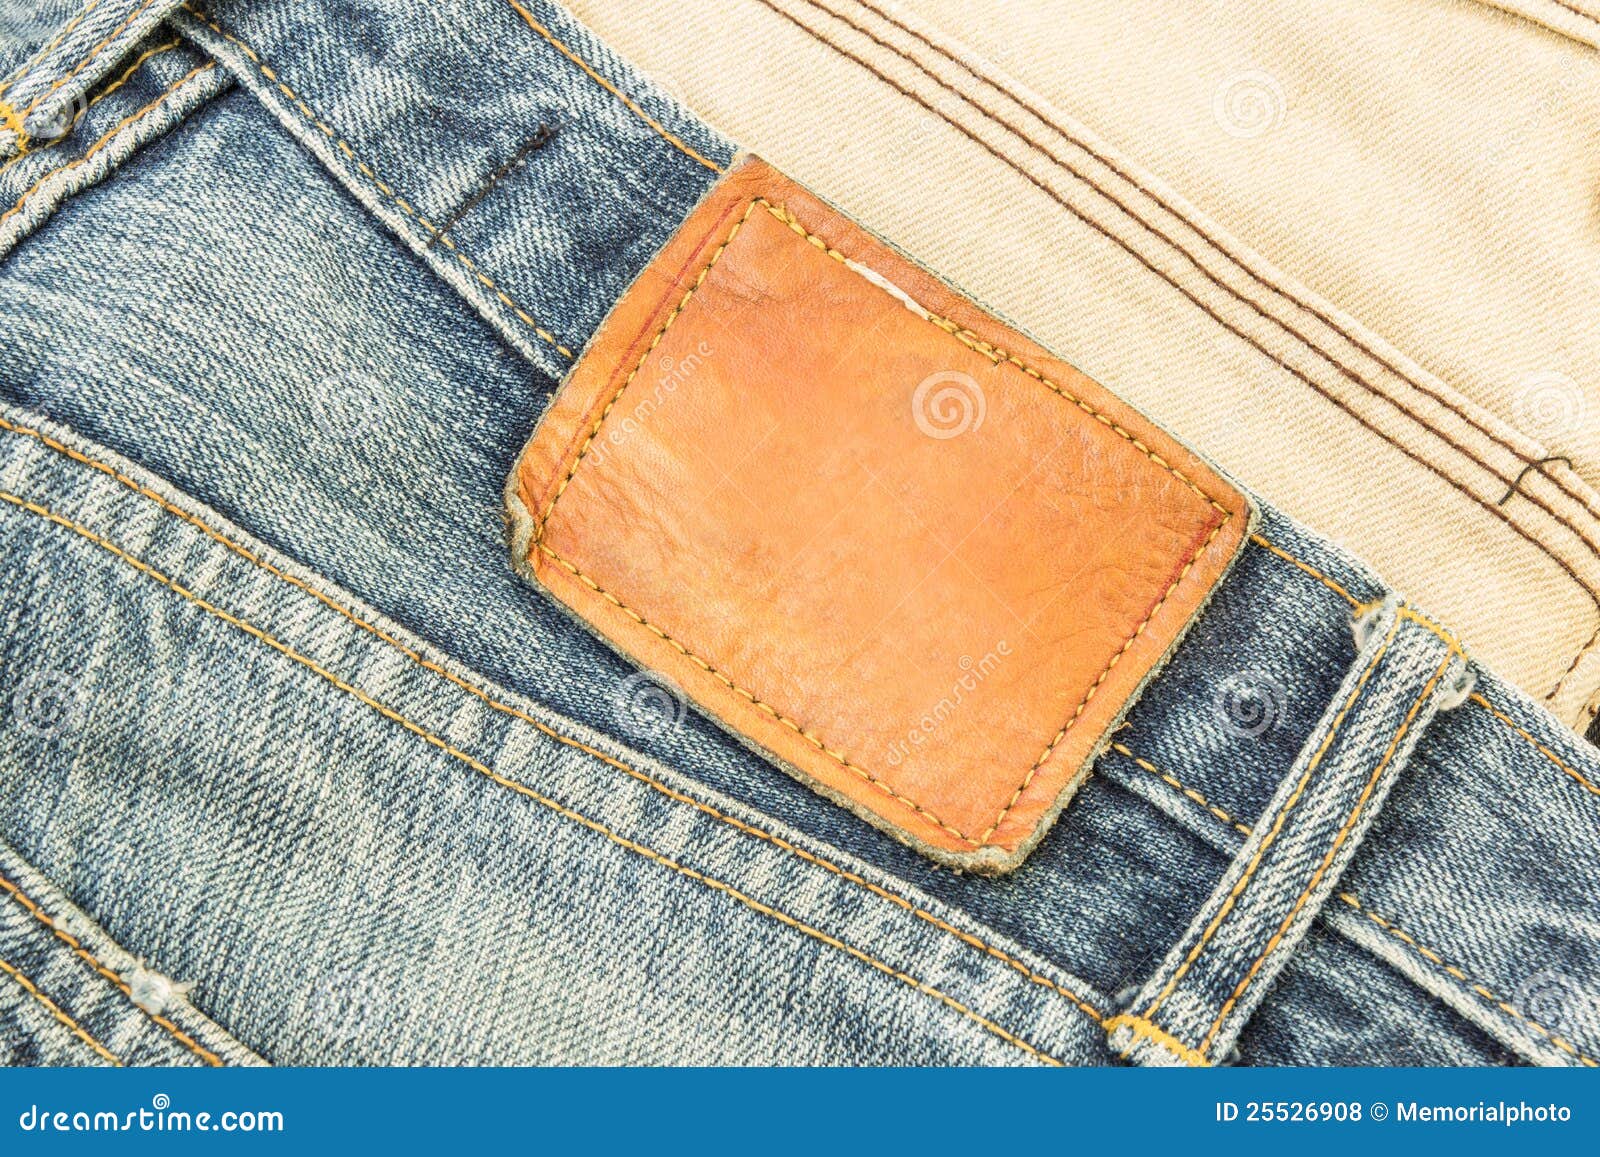 Jeans label stock photo. Image of pattern, fashion, leather - 25526908